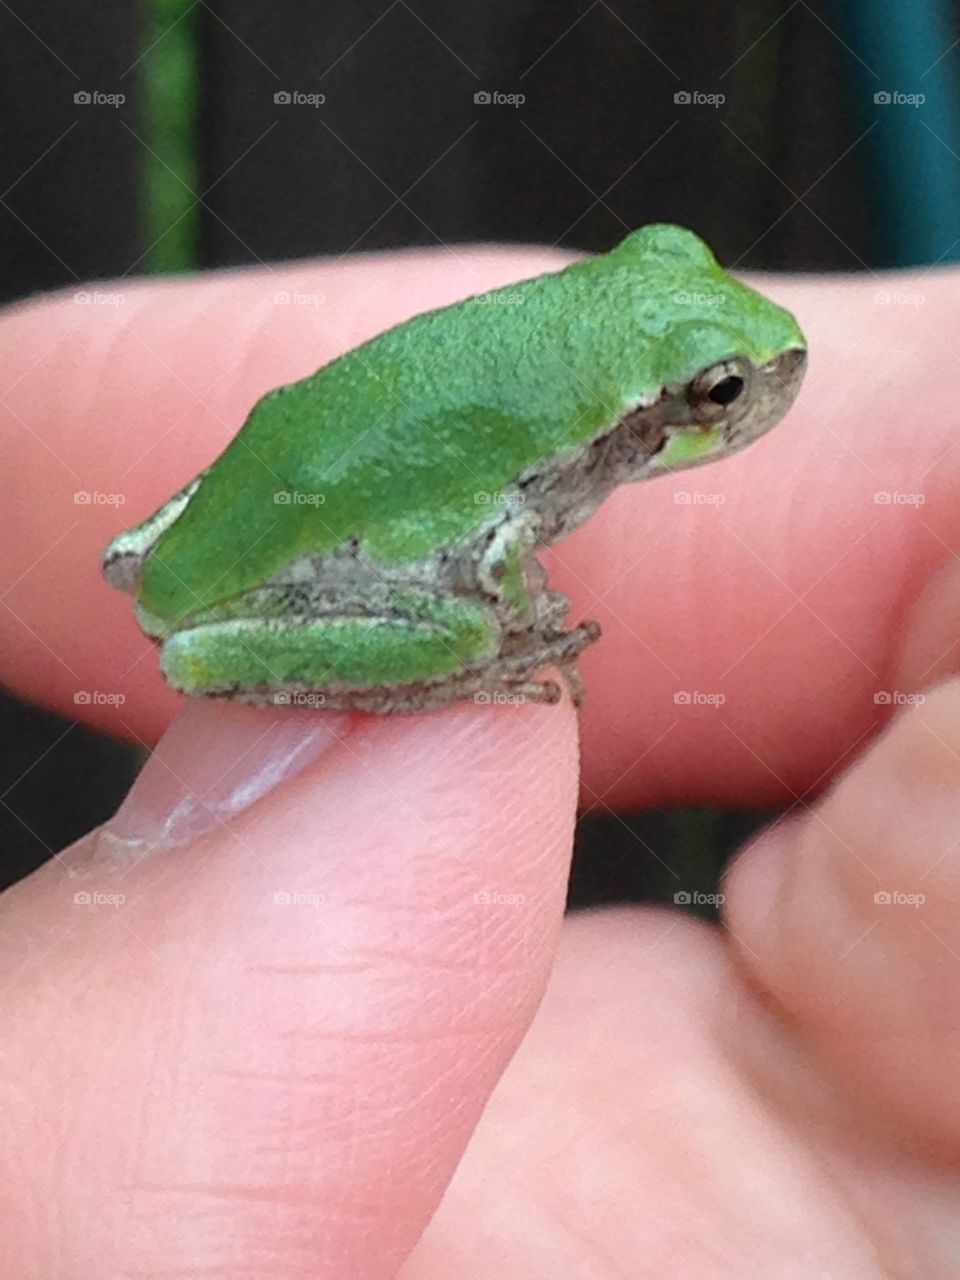 Tree frog on my thumb. Little tree frog, resting on my thumb nail!